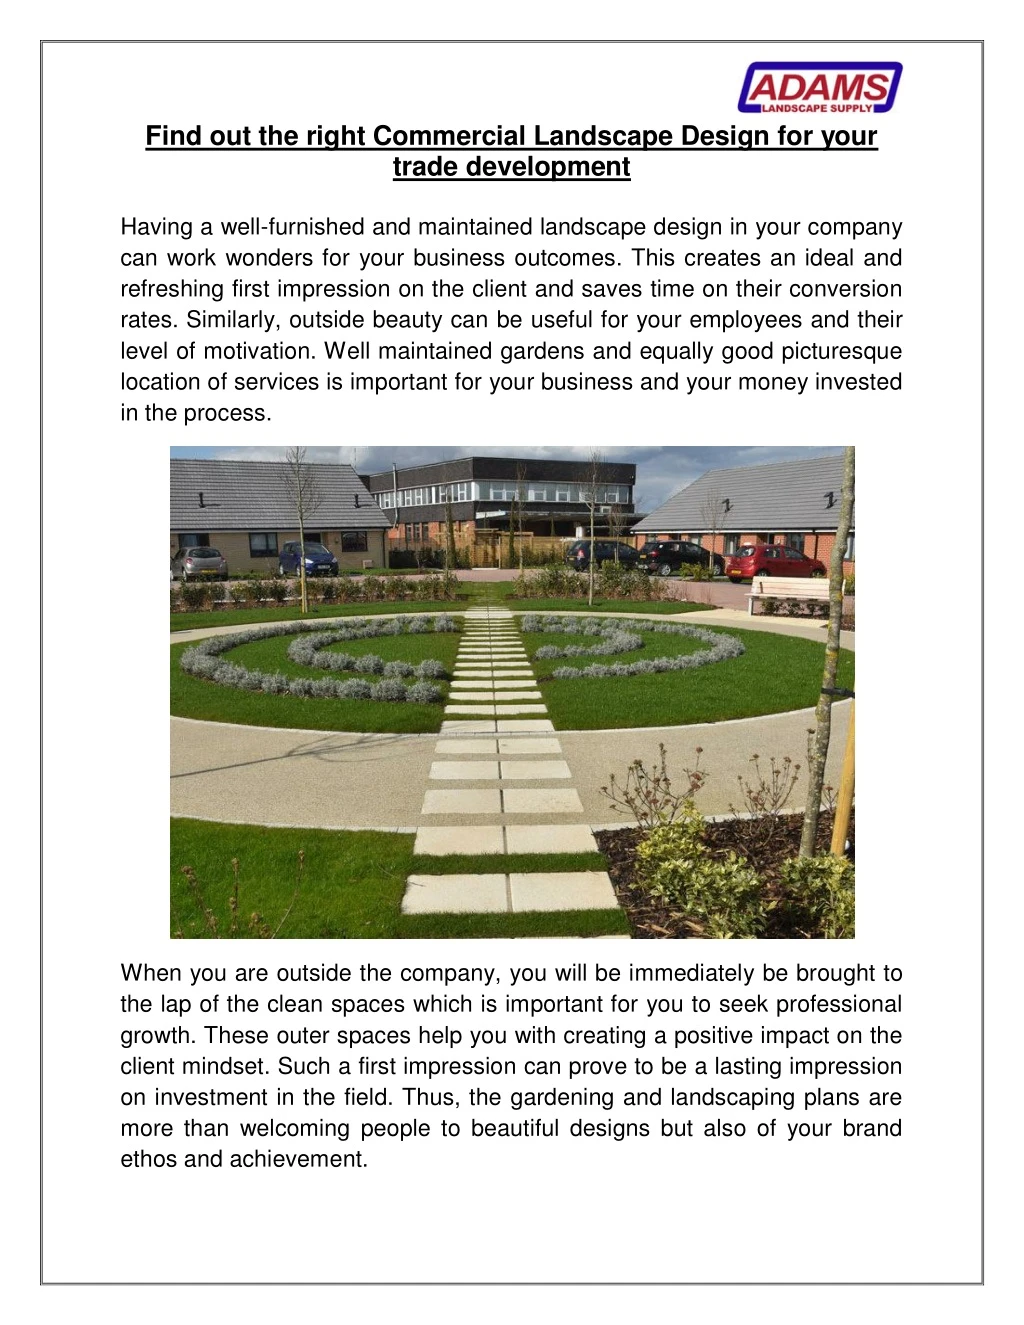 find out the right commercial landscape design